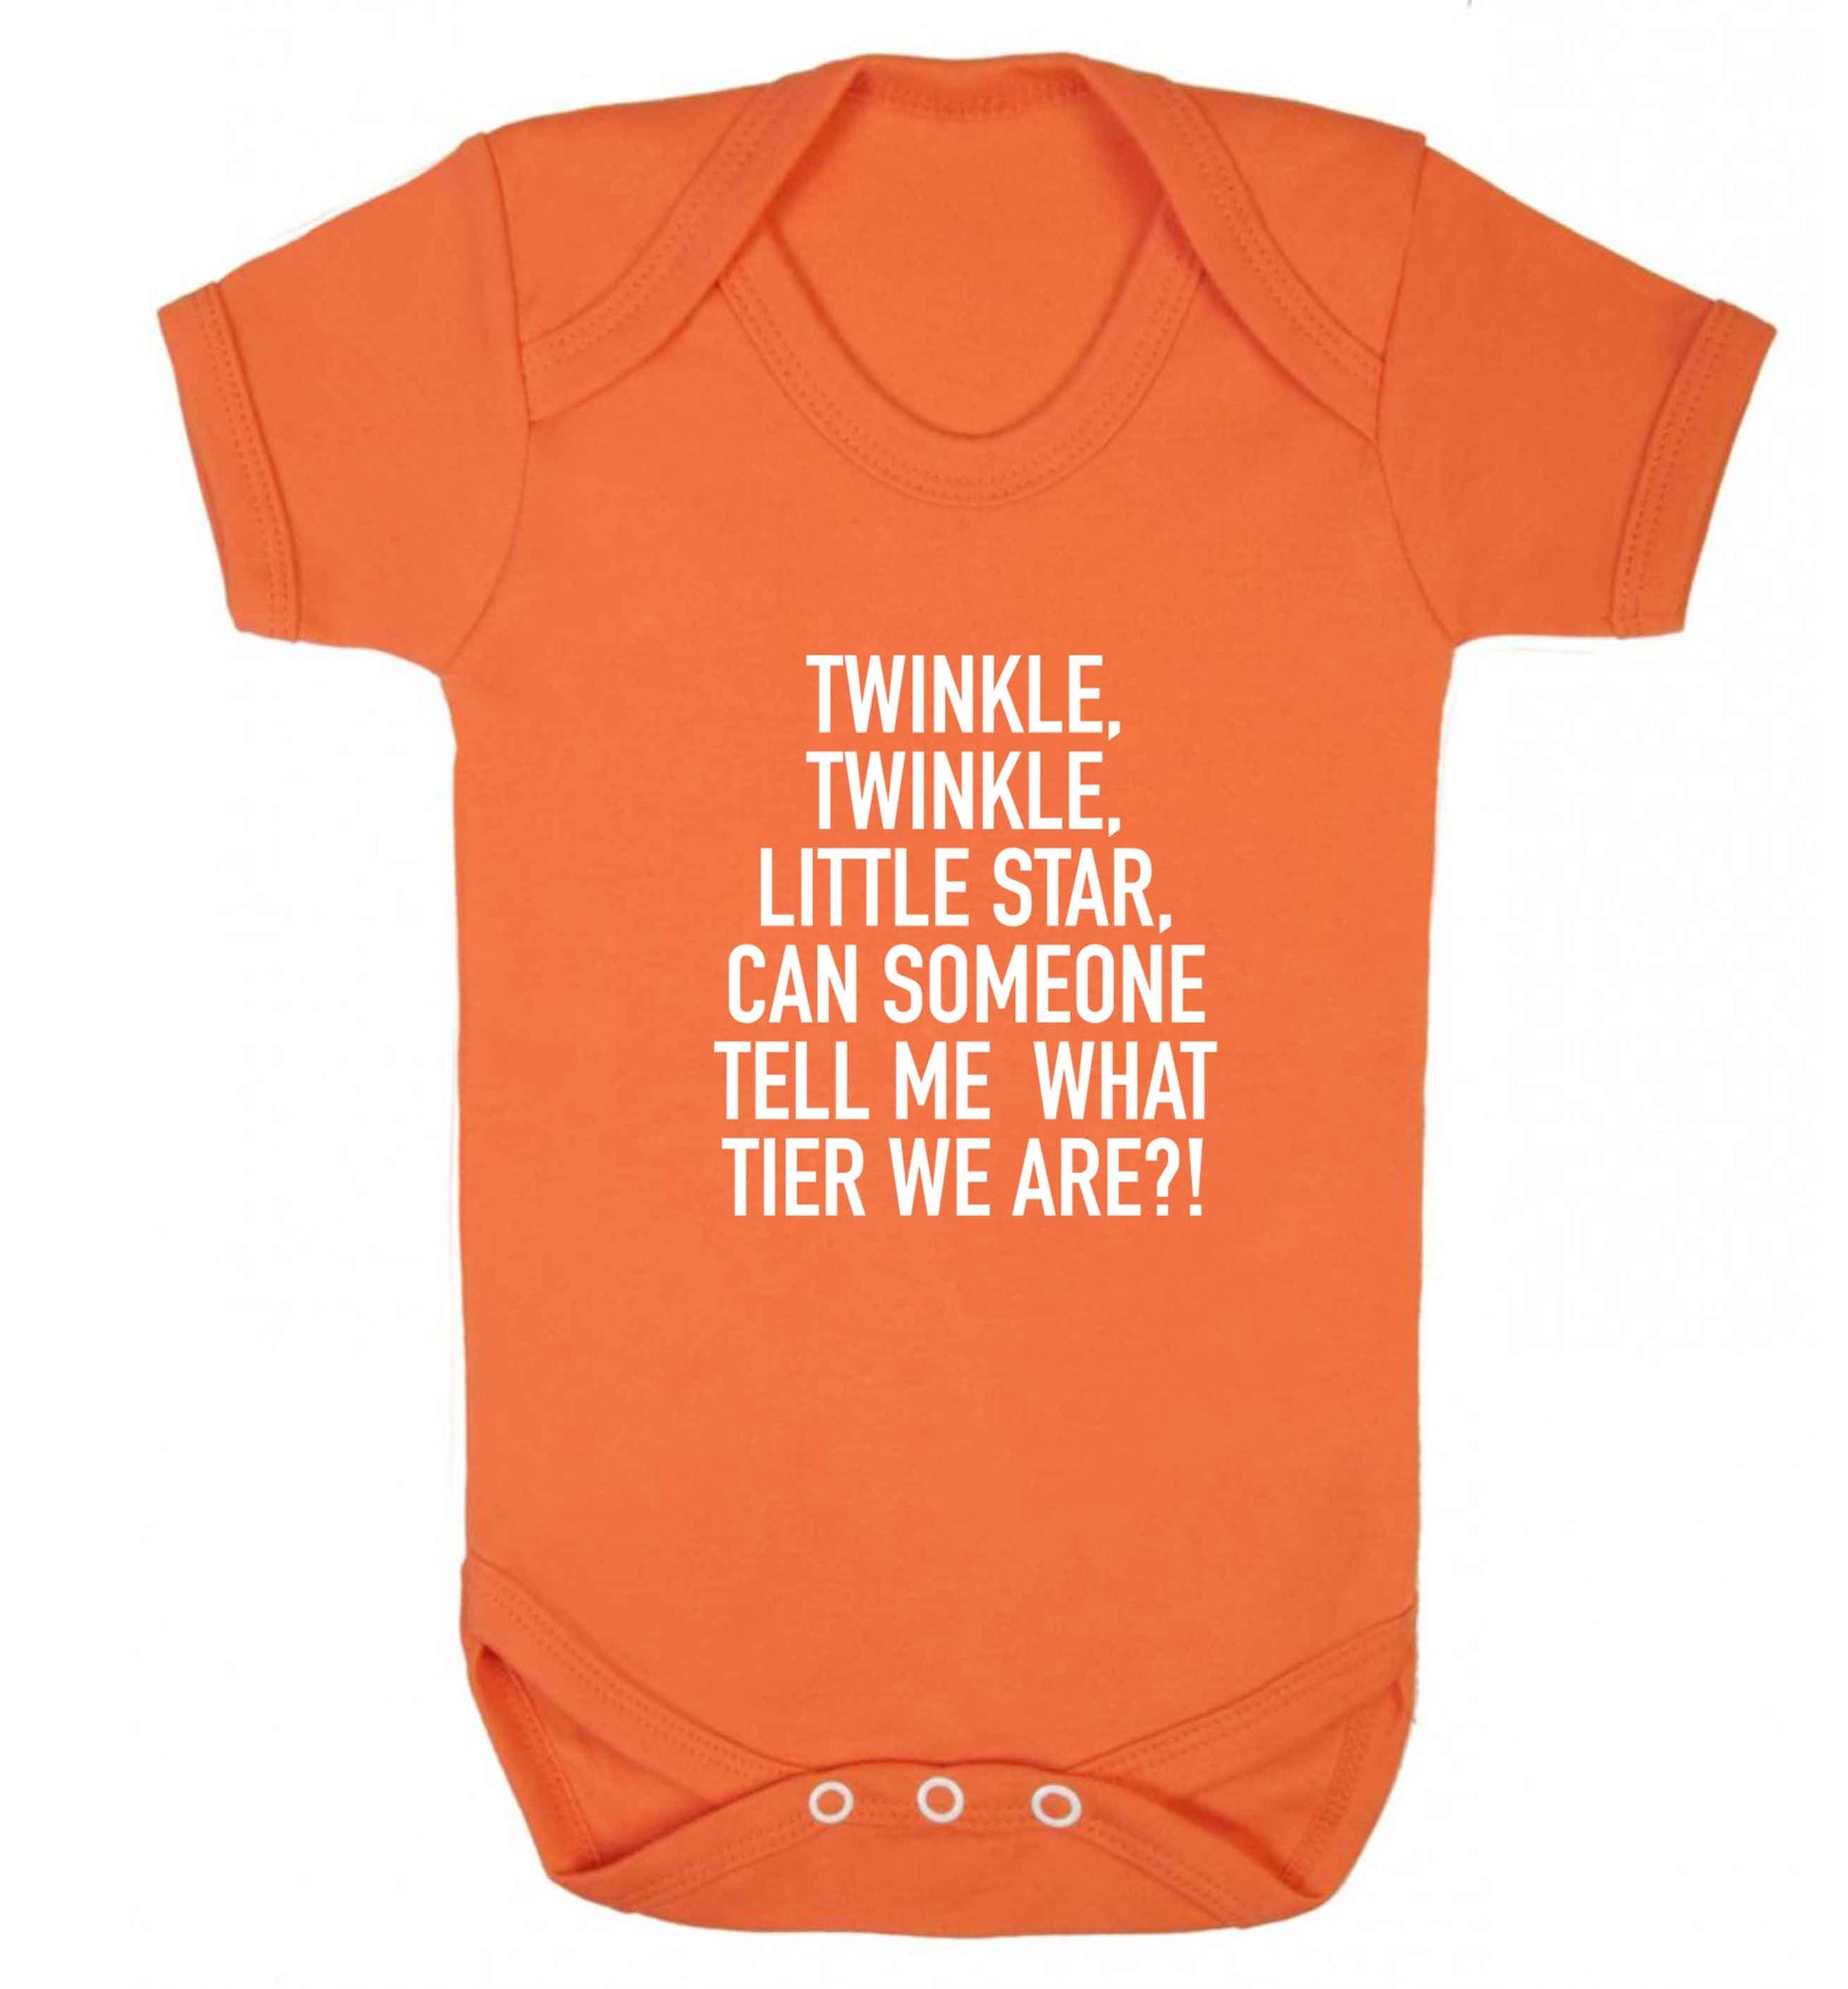 Twinkle twinkle, little star does anyone know what tier we are? baby vest orange 18-24 months